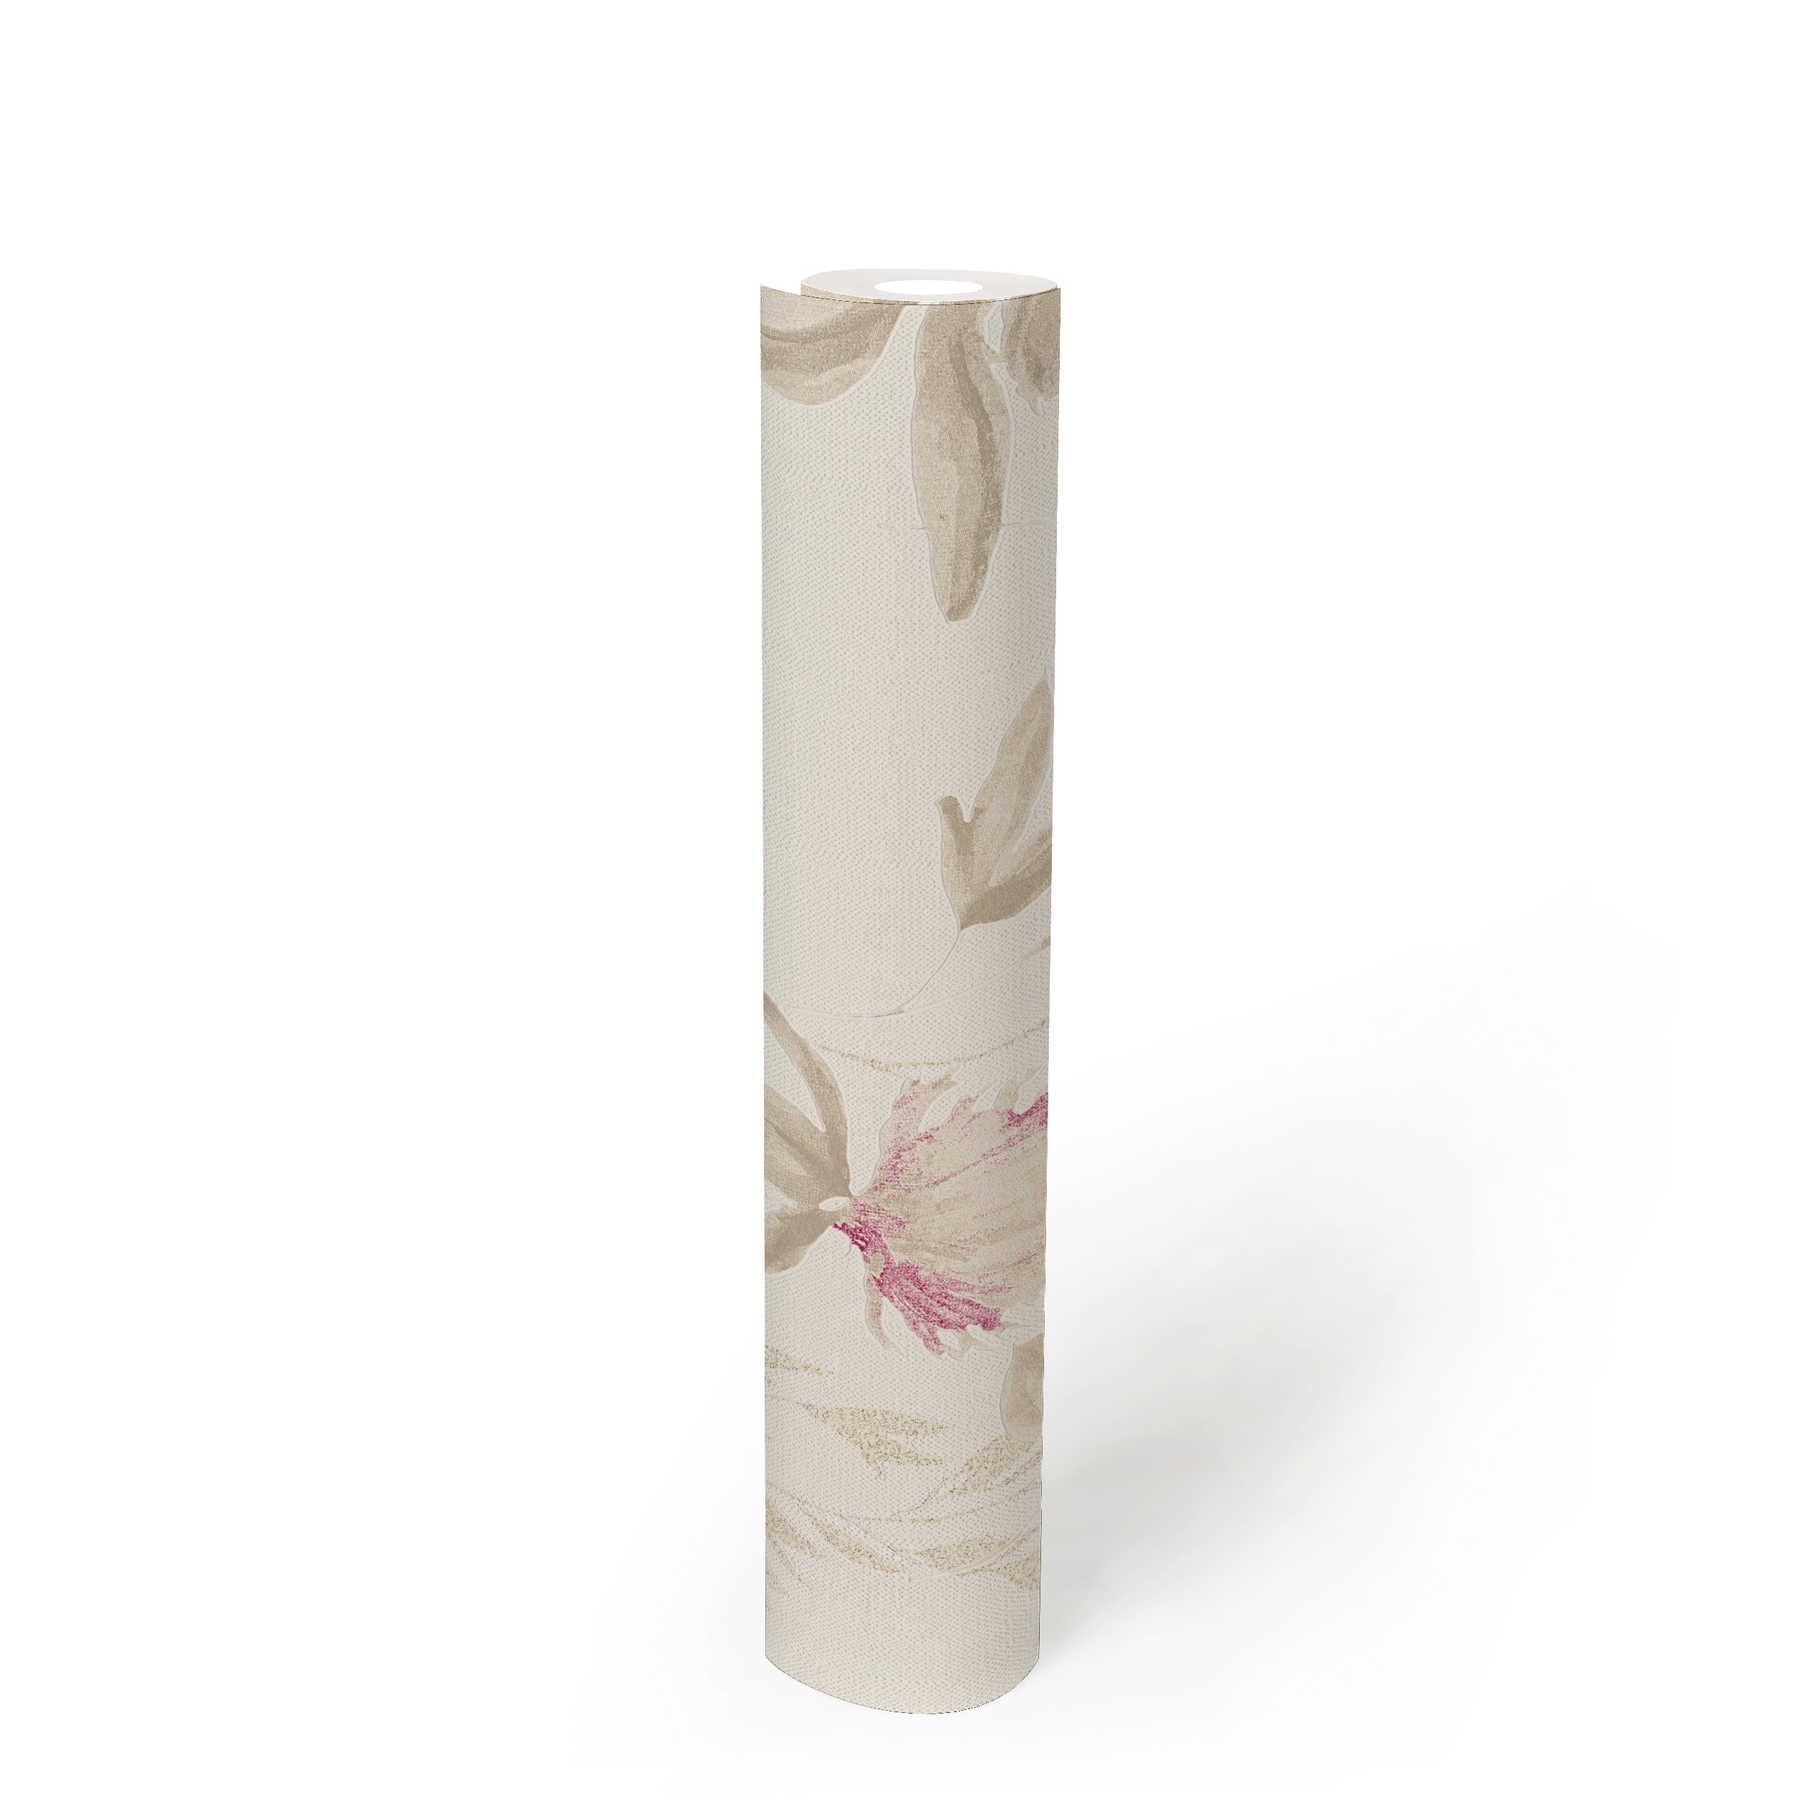             Abstract floral non-woven wallpaper with pink accents - beige, purple
        